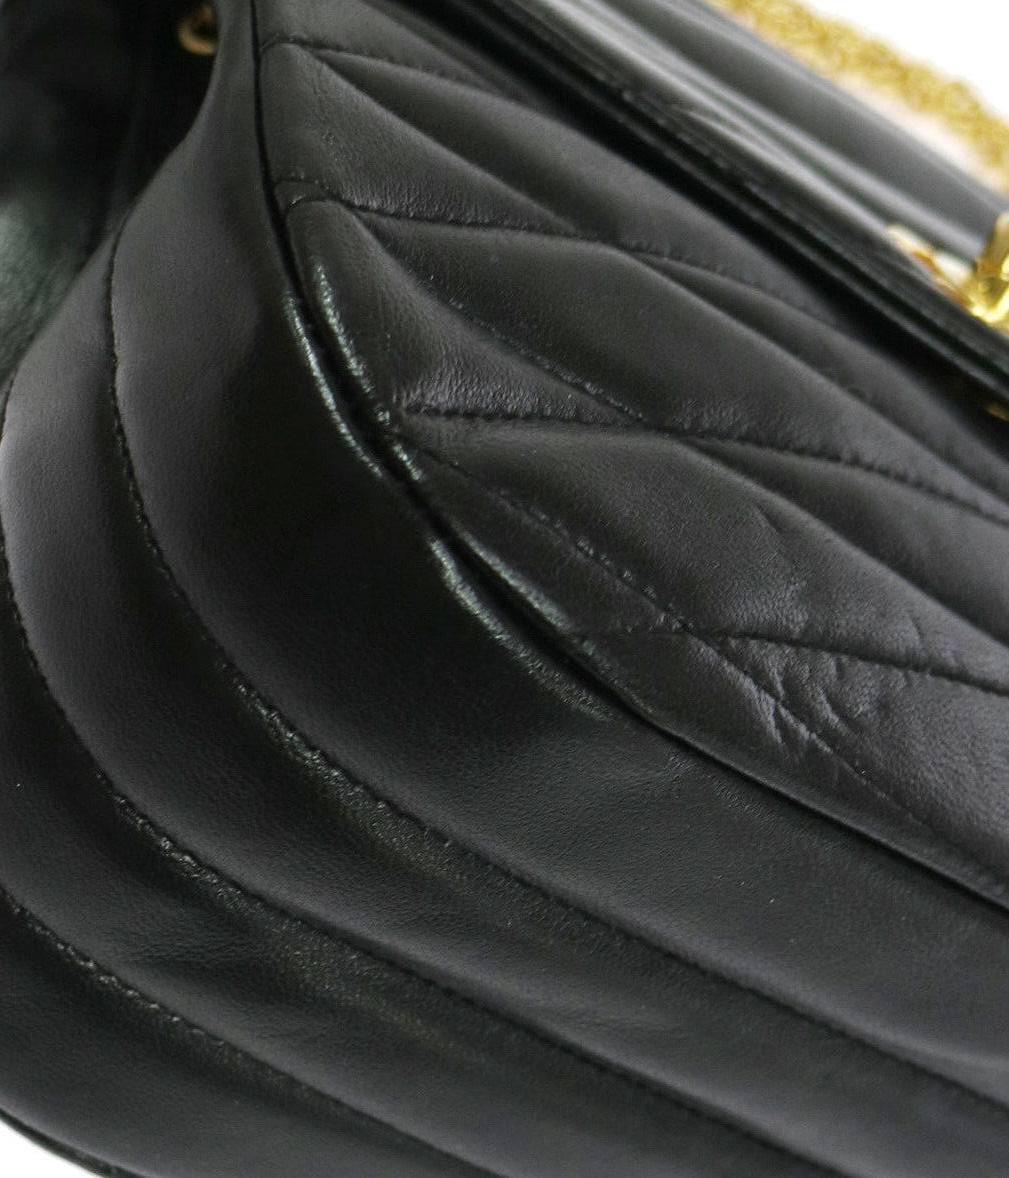 Women's Chanel New Black Leather Party Evening Shoulder Flap Bag in Box